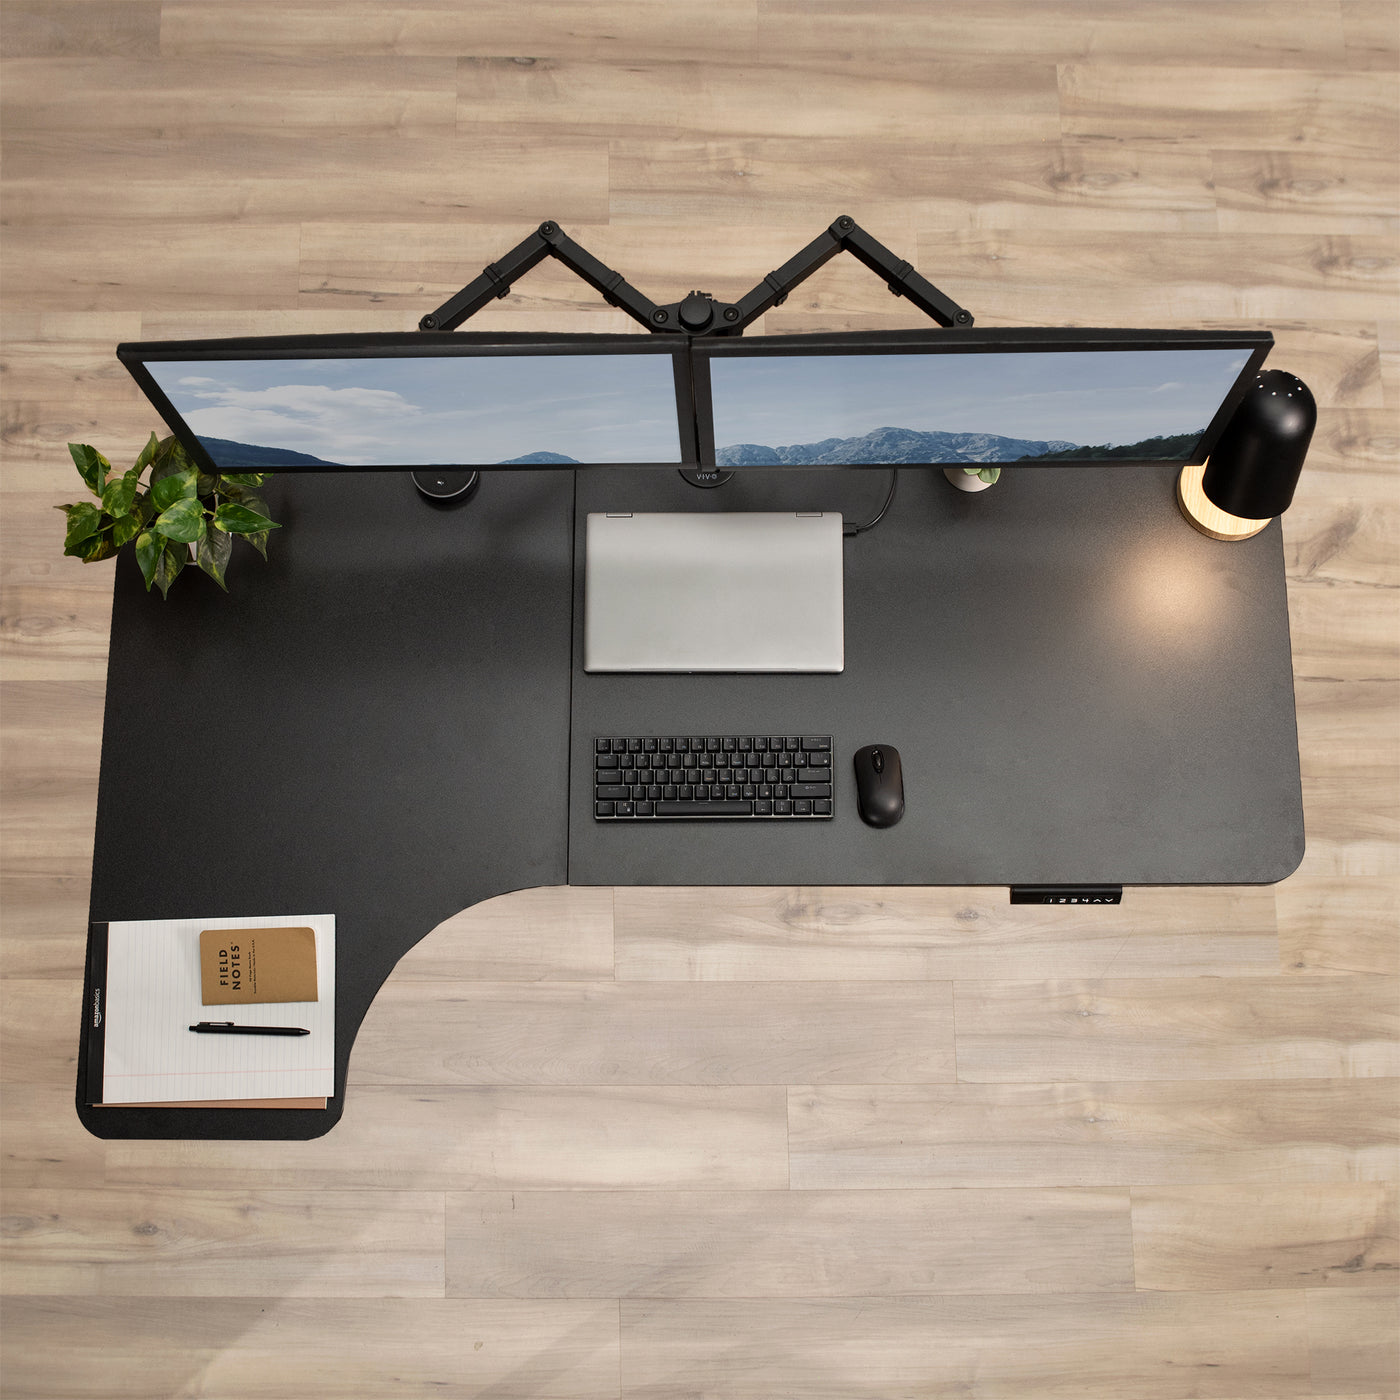 Sturdy corner desktop table top with reversible design and wide surface.